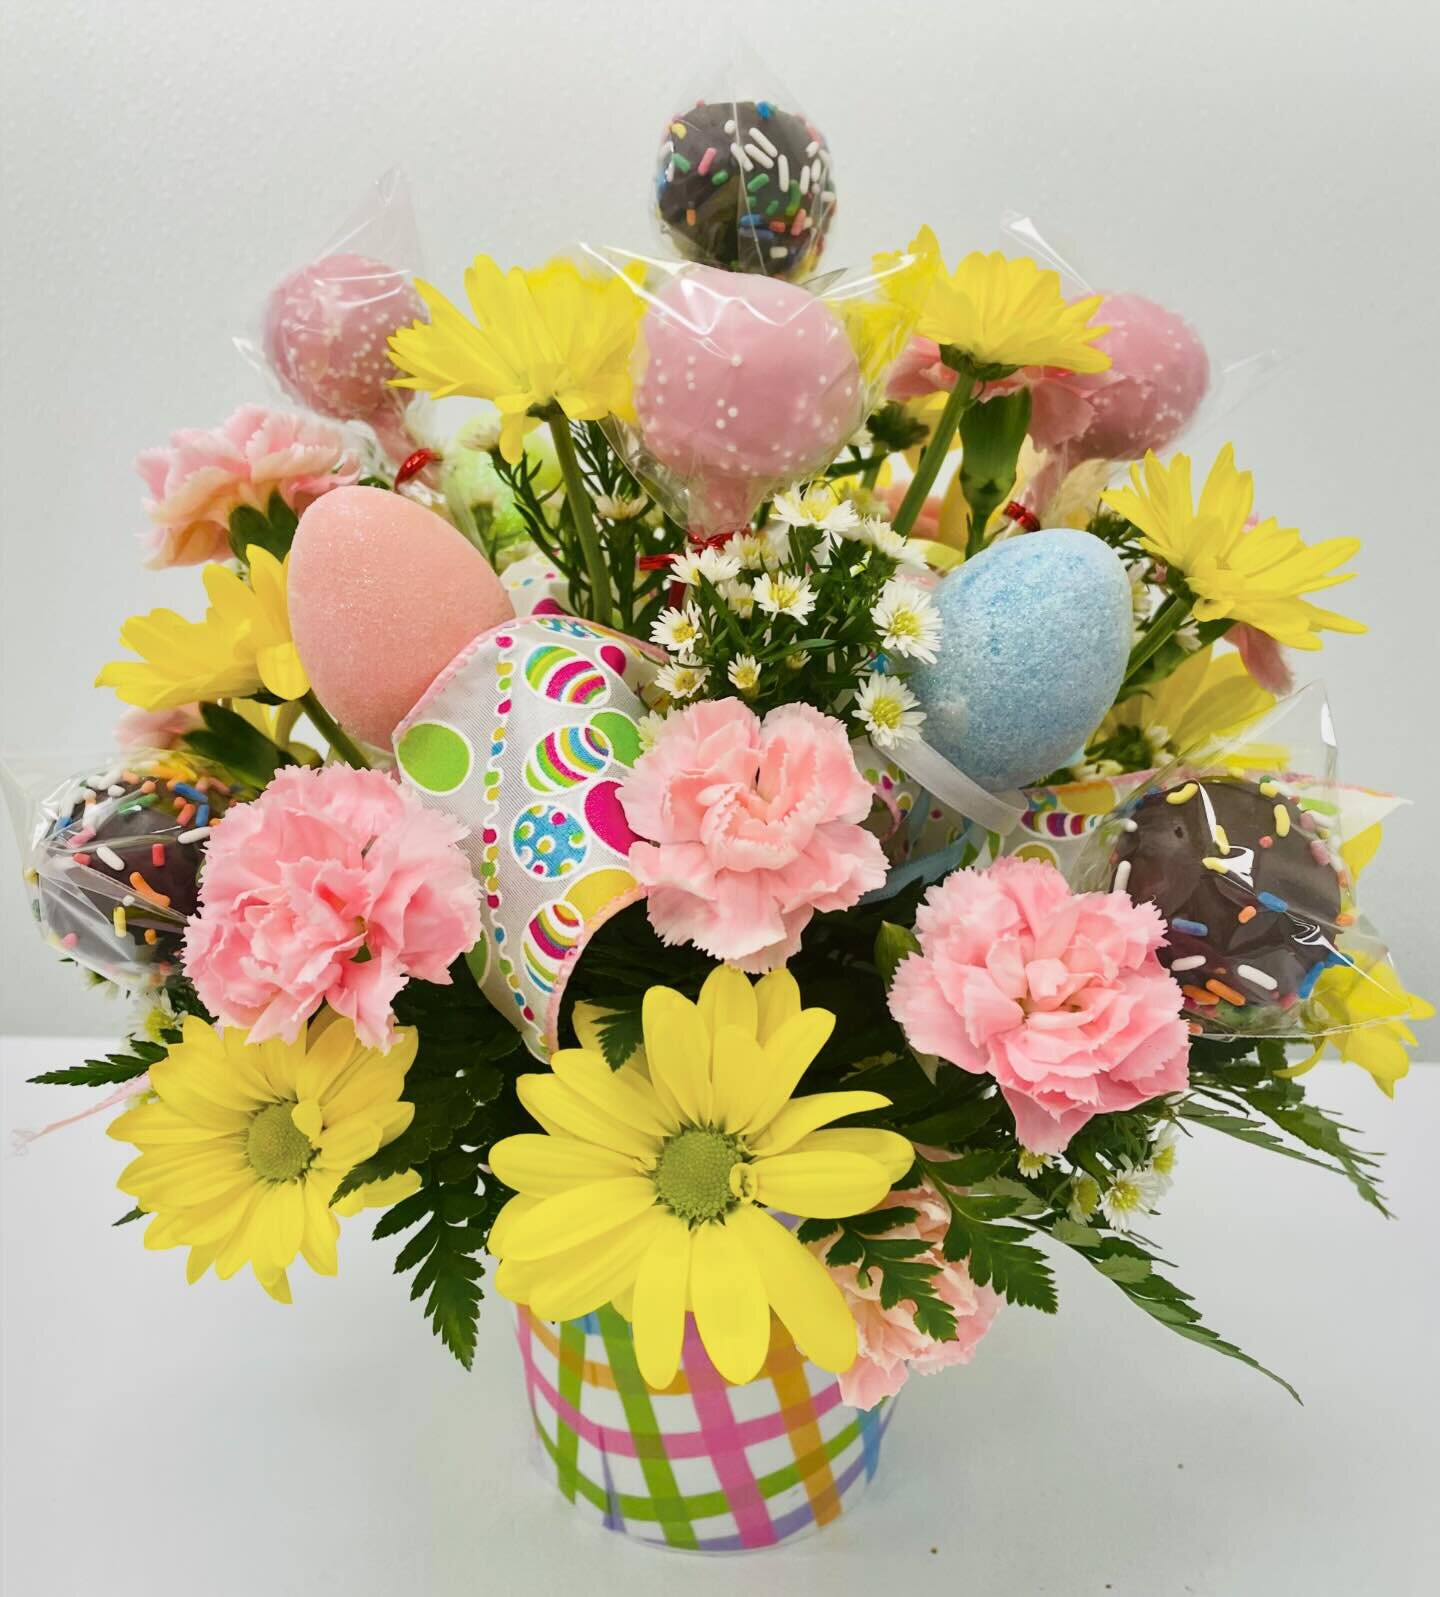 Our Pops &amp; Posies has some egg-cellent accents this season! Order online at blossomsfloristandbakery.com

#cakepoparrangement #flowerdelivery #bakerydelivery